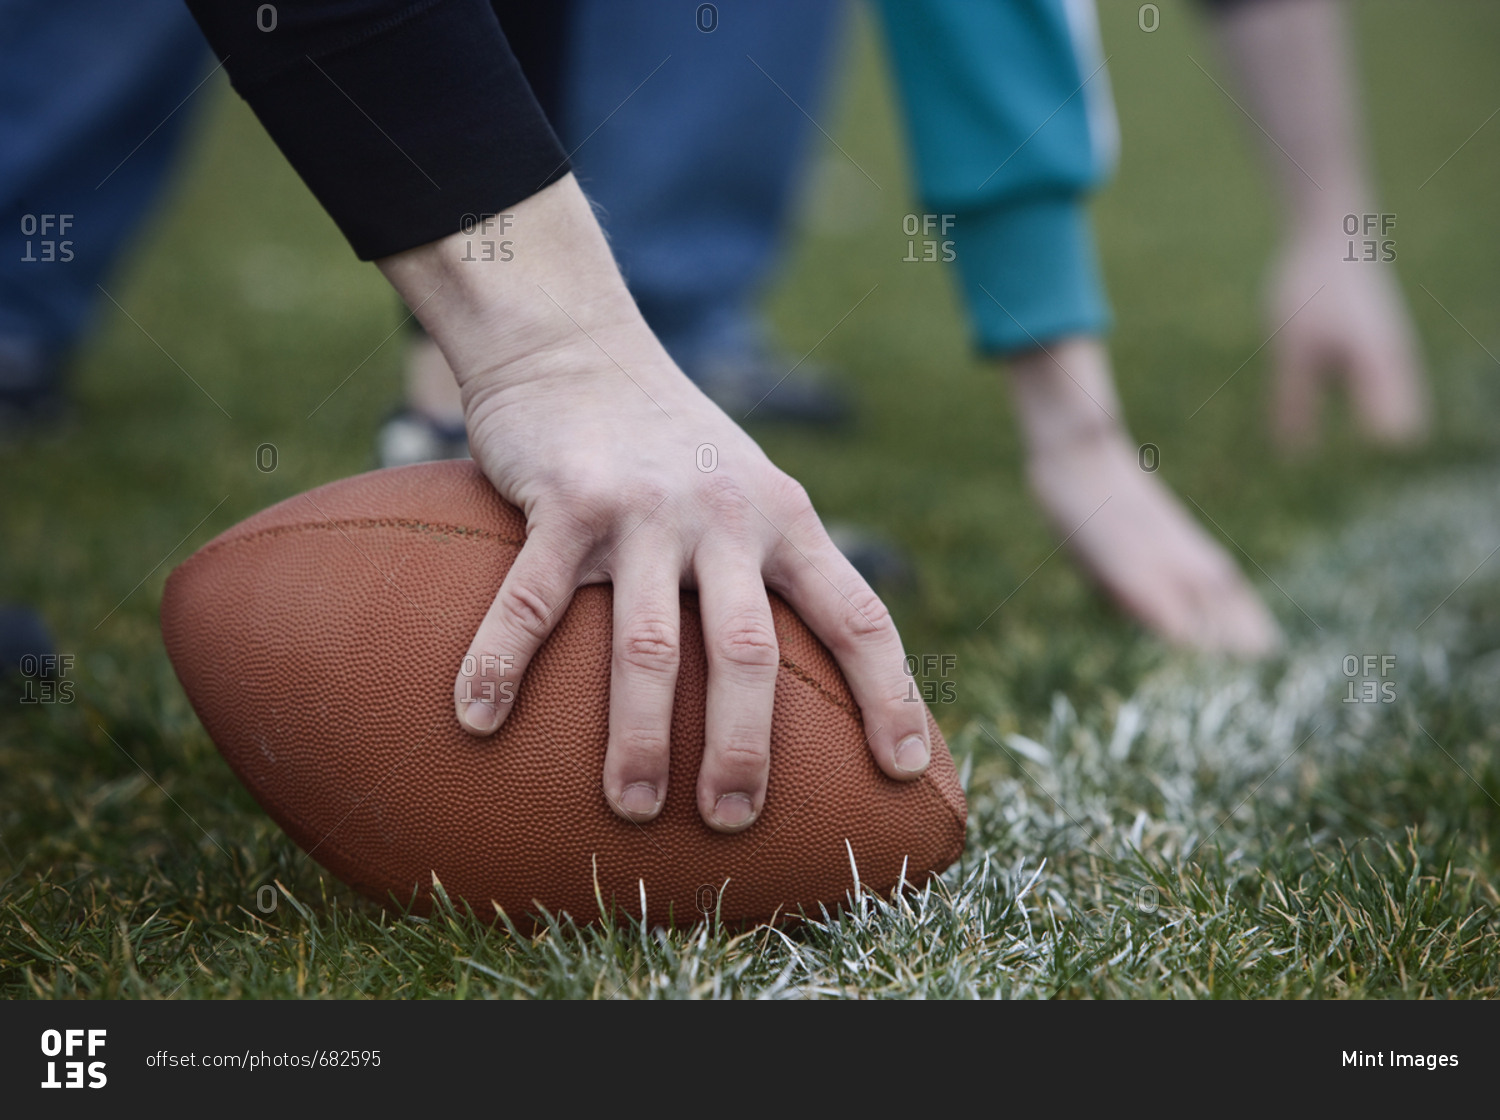 Close up of a hand holding an oval football on the line, during a game of non-contact flag football.